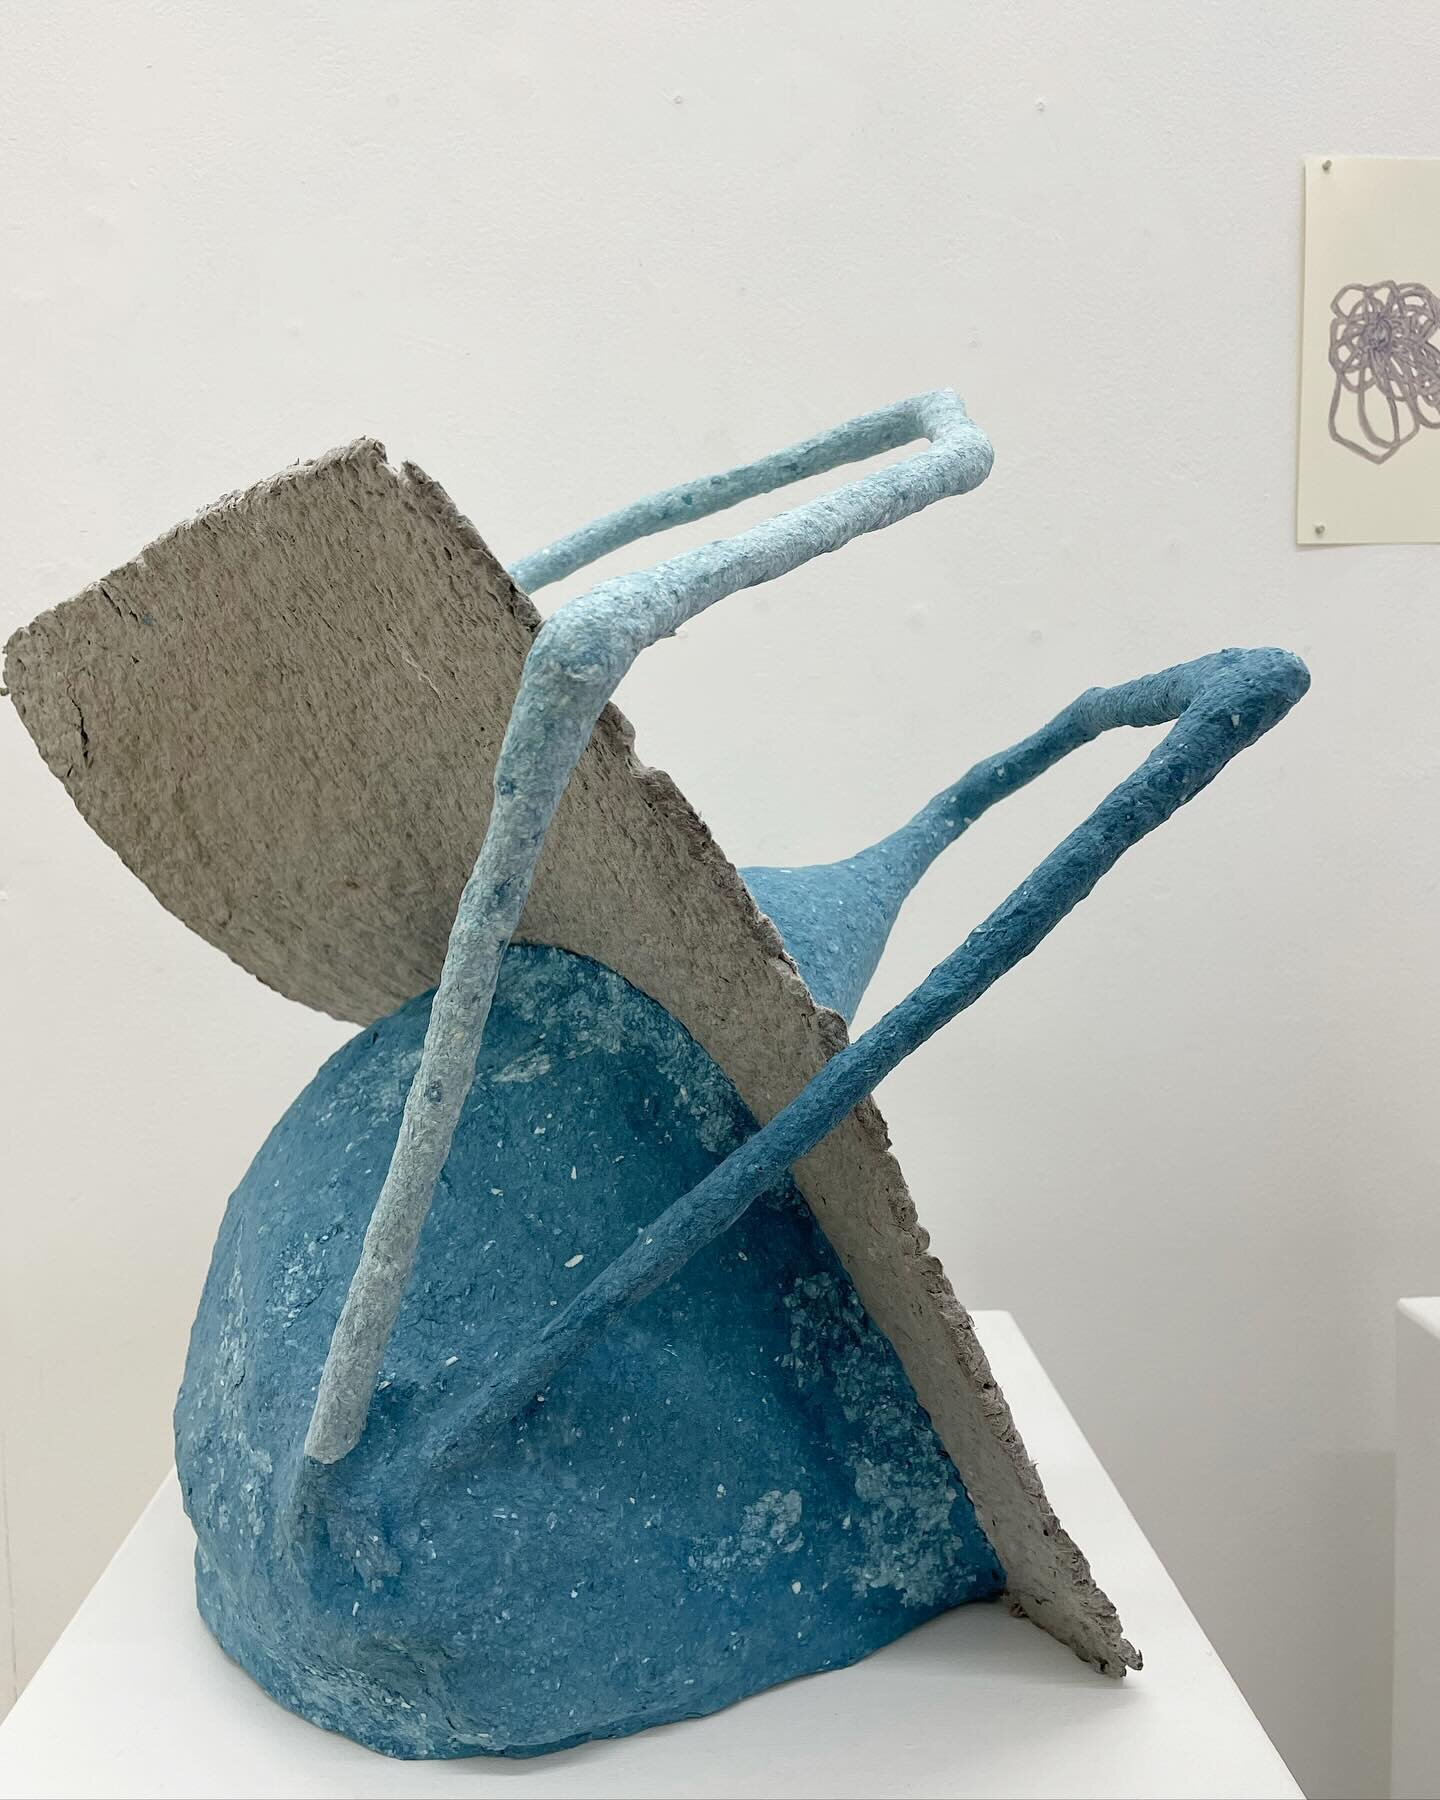 *
Multitasking
Eleanor Bedlow / Julie Caves / Geoffrey Chambers / Rebecca Elves
A group exhibition of four artists who make both 2D and 3D work.
The Lido Stores, Margate
Thursday 21 March - Saturday 6 April

Eleanor Bedlow, Anchor, 2024, paper pulp, 